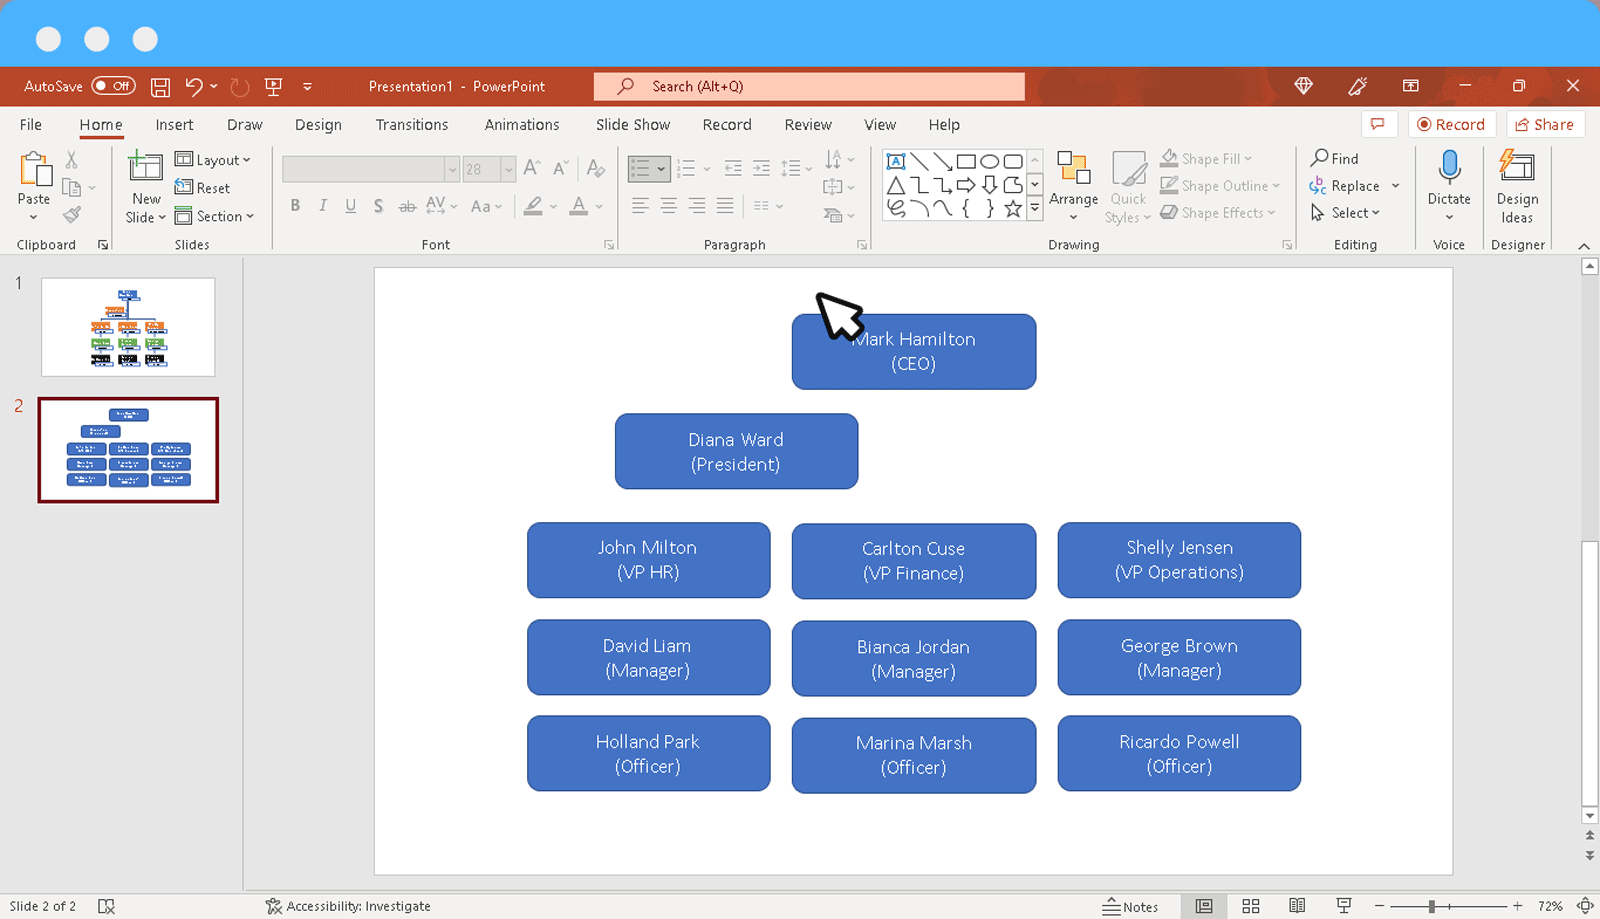 How to Create the Hierarchy in an Org Chart in PowerPoint?